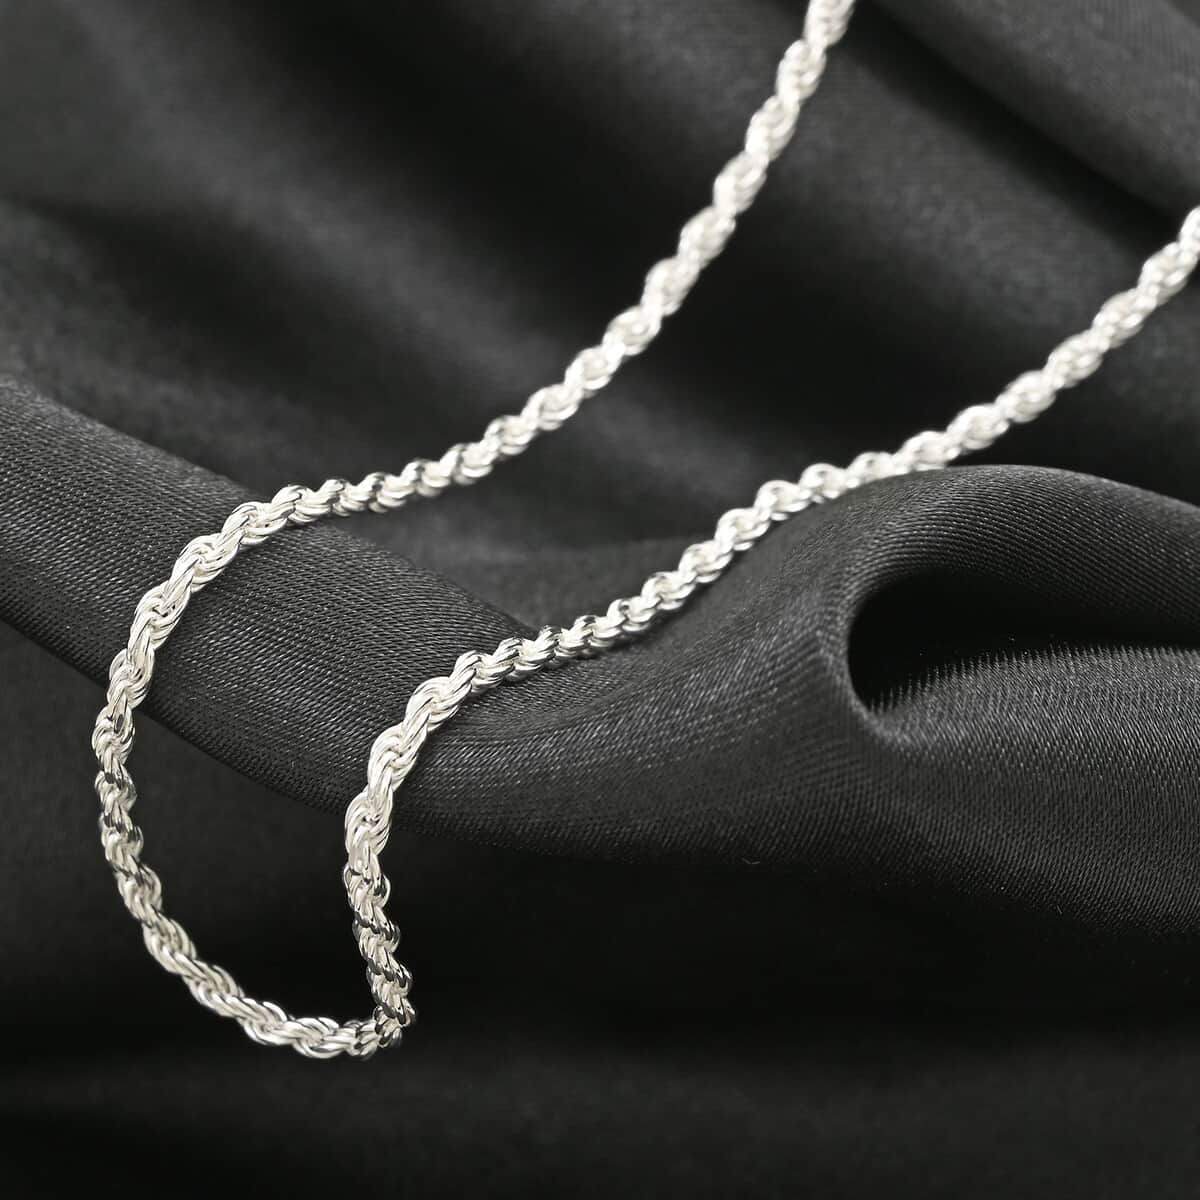 Italian Sterling Silver Rope Chain Necklace 22 Inches 7.4 Grams